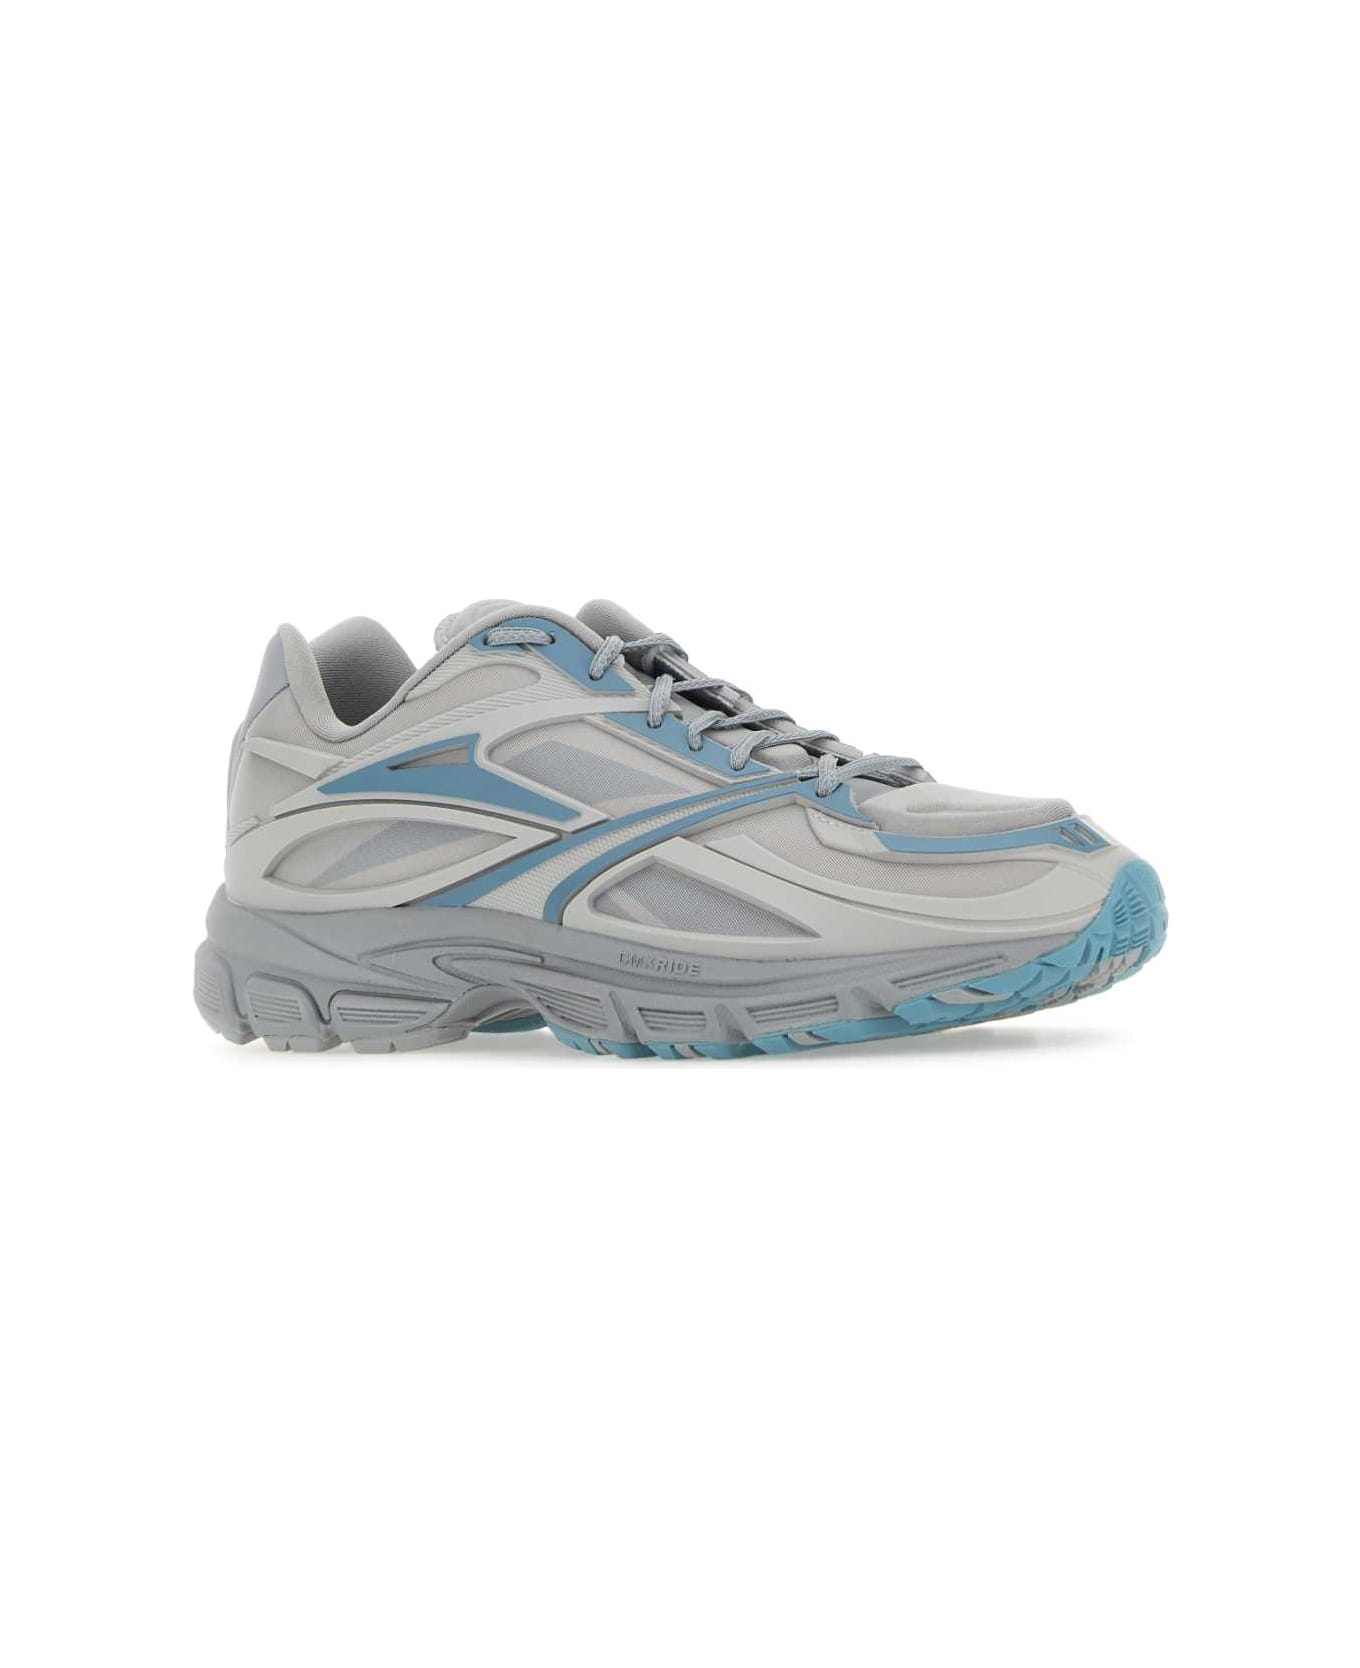 Reebok Multicolor Fabric And Rubber Premier Road Modern Sneakers - GREY